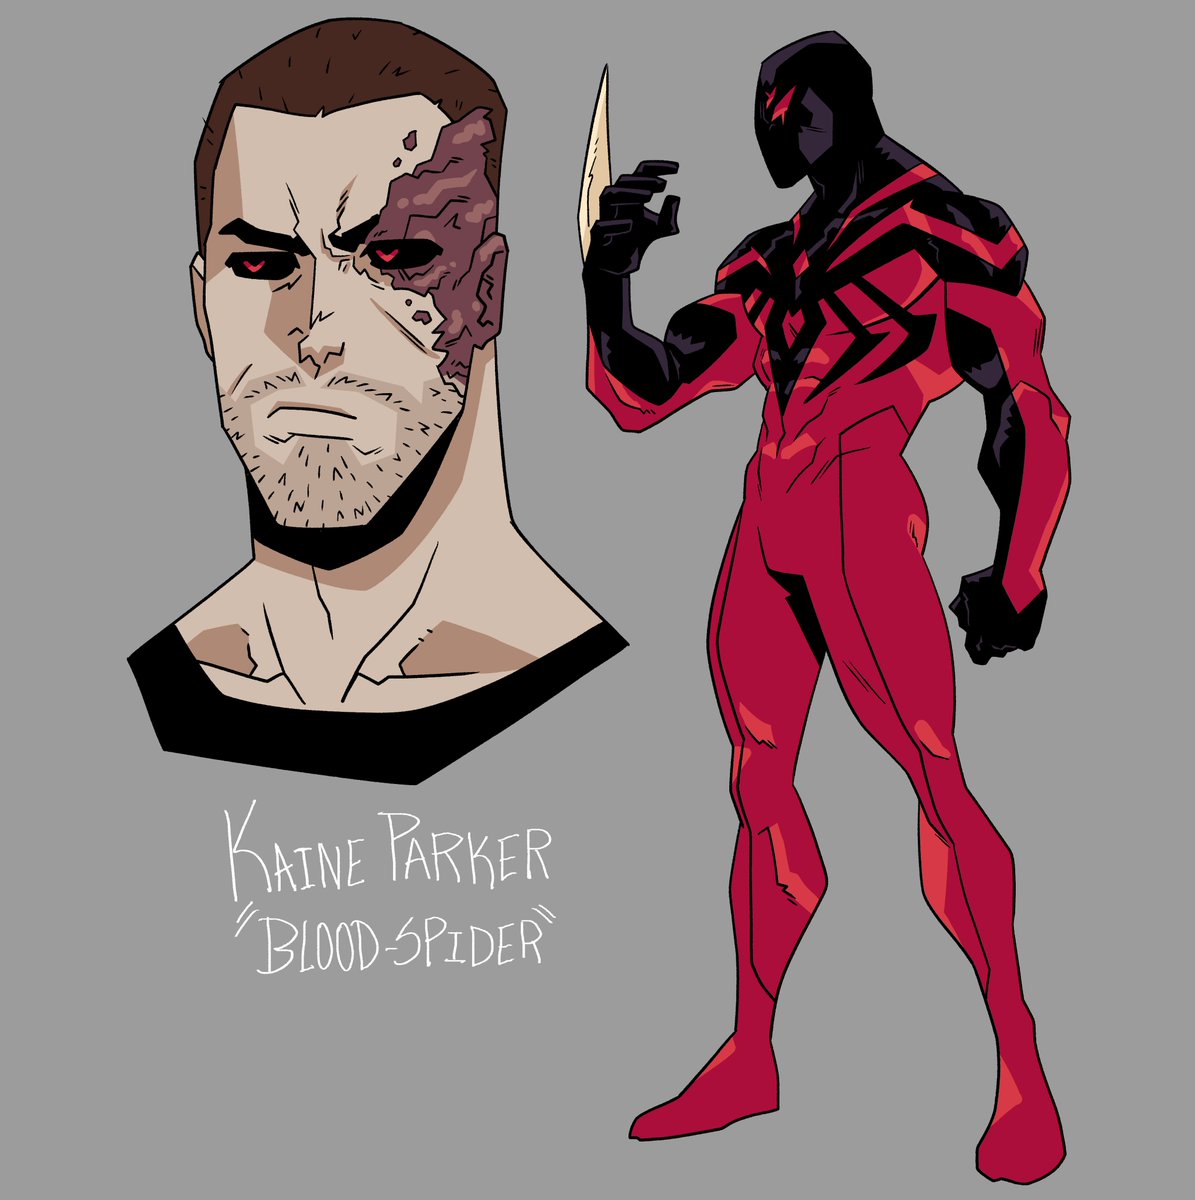 Kaine would think 'Blood-Spider' is a cool name, and it would be less confusing than having two Scarlet Spiders